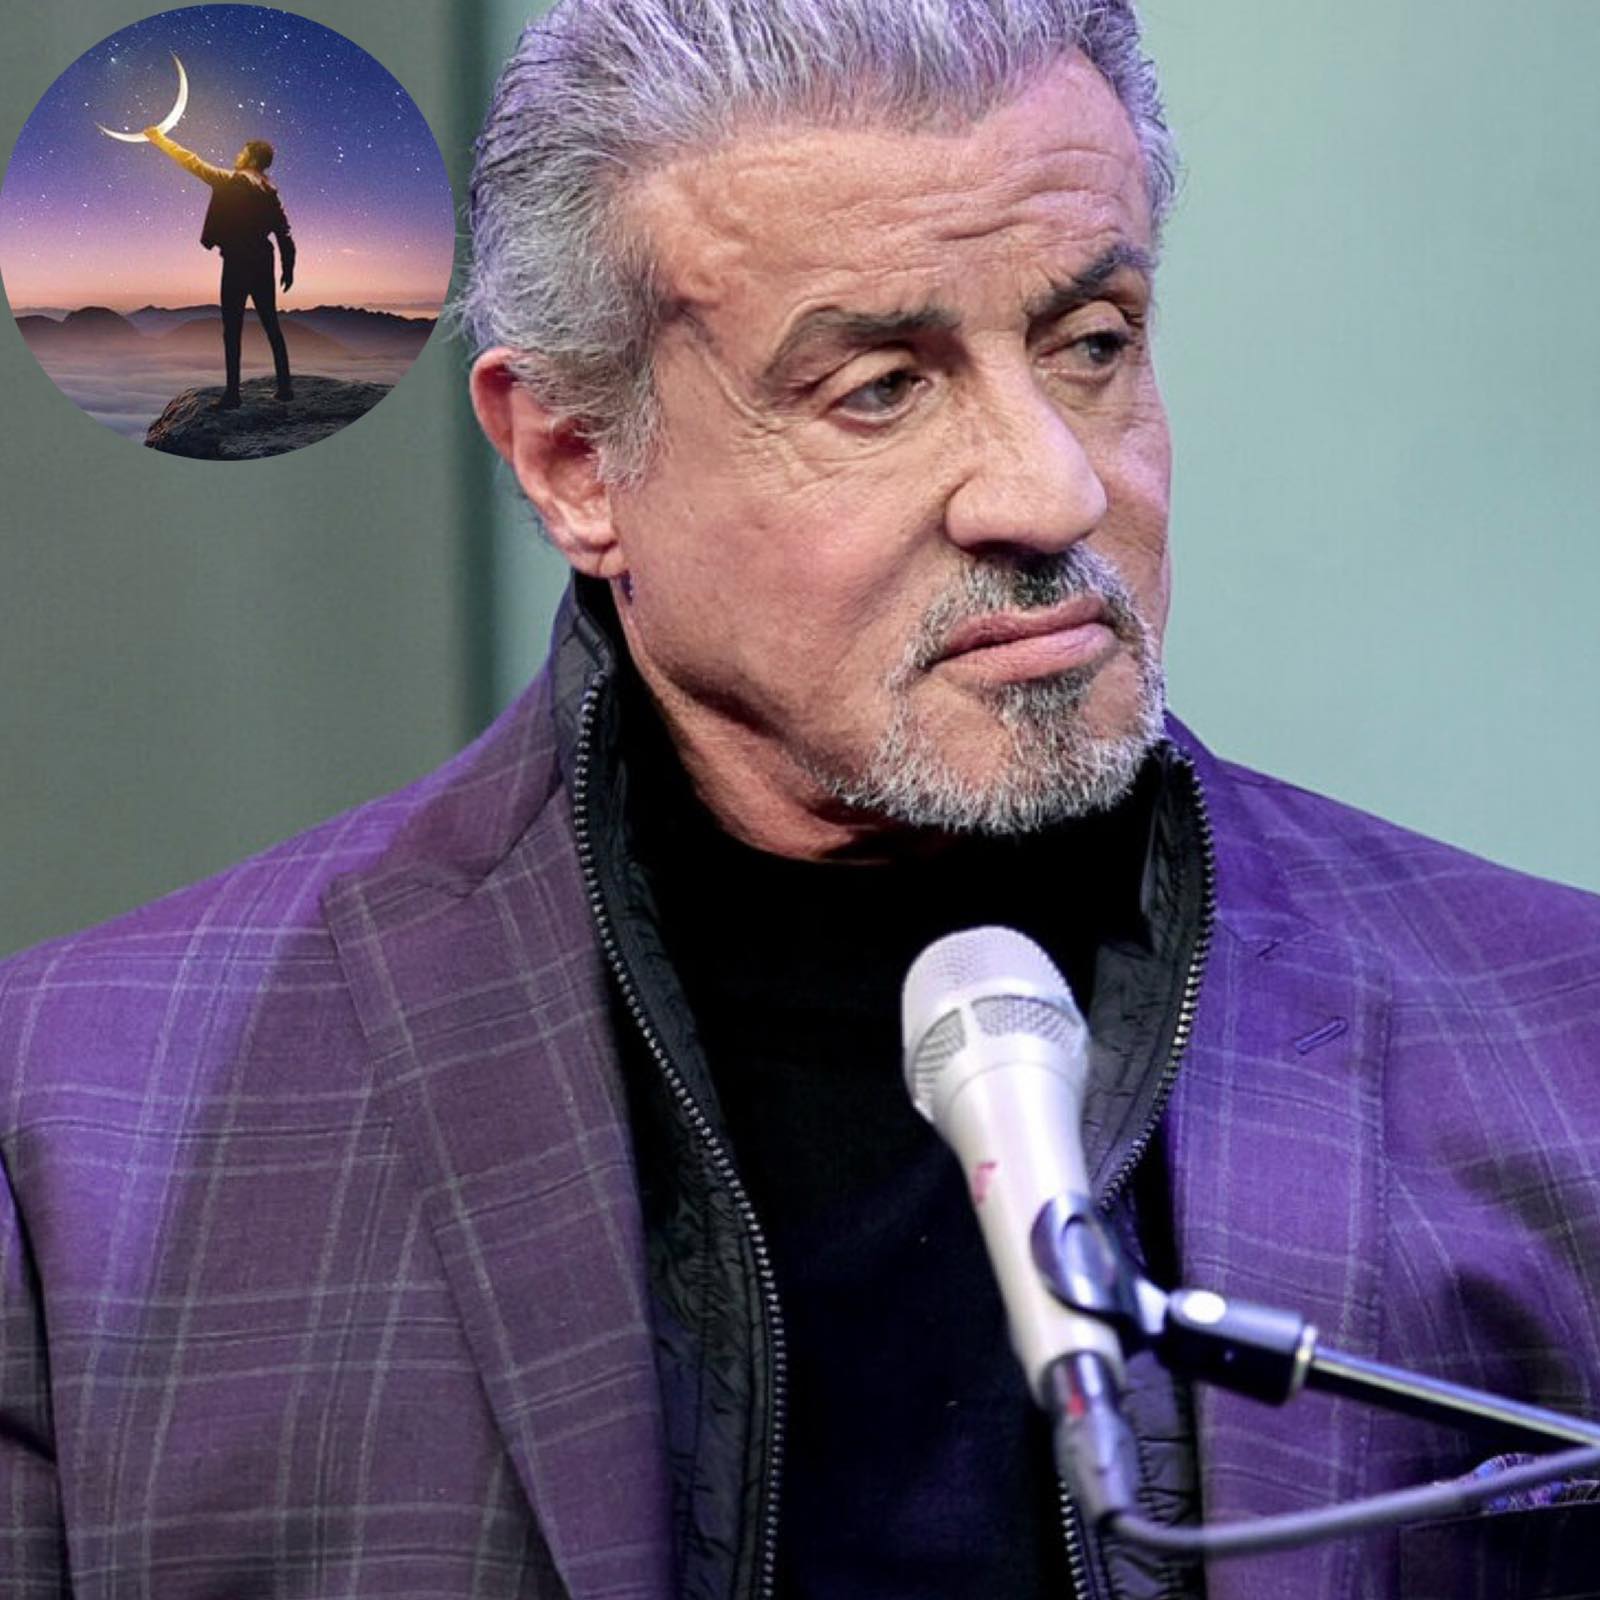 Rephrase: Sylvester Stallone Declines Multi-Million Dollar Offer from NIKE, Citing a Stance Against Wokeness.